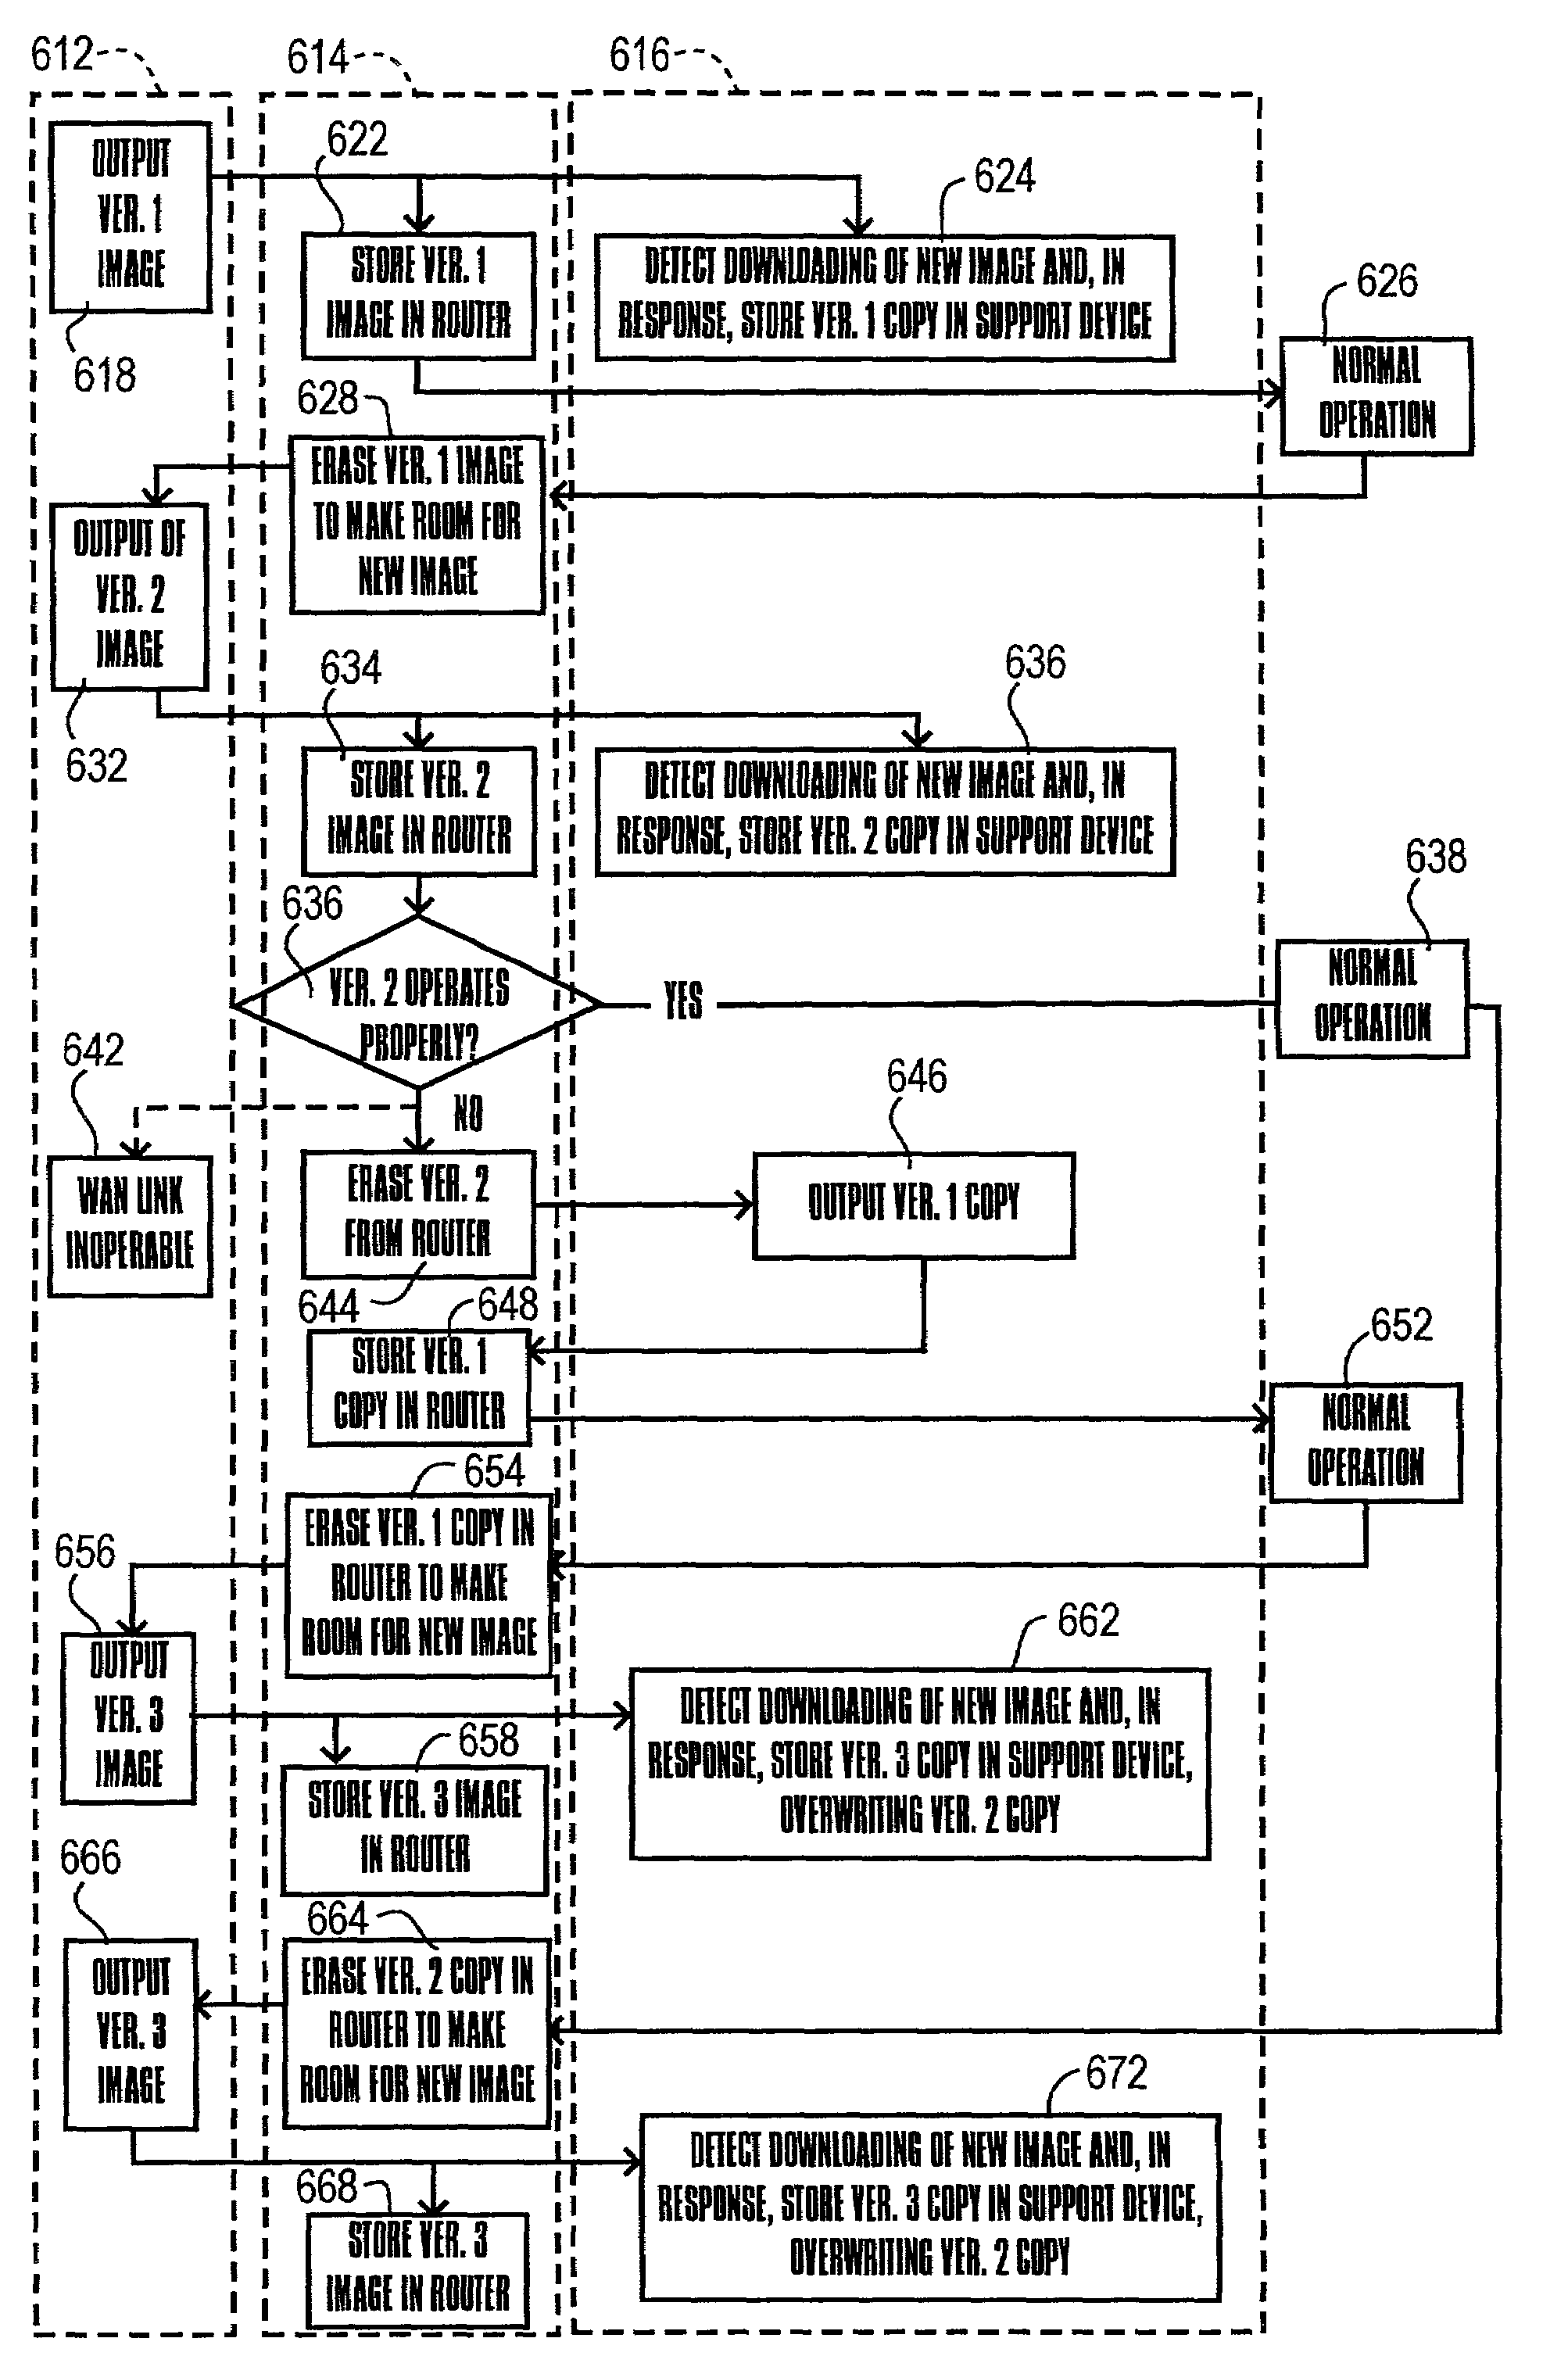 Router image support device